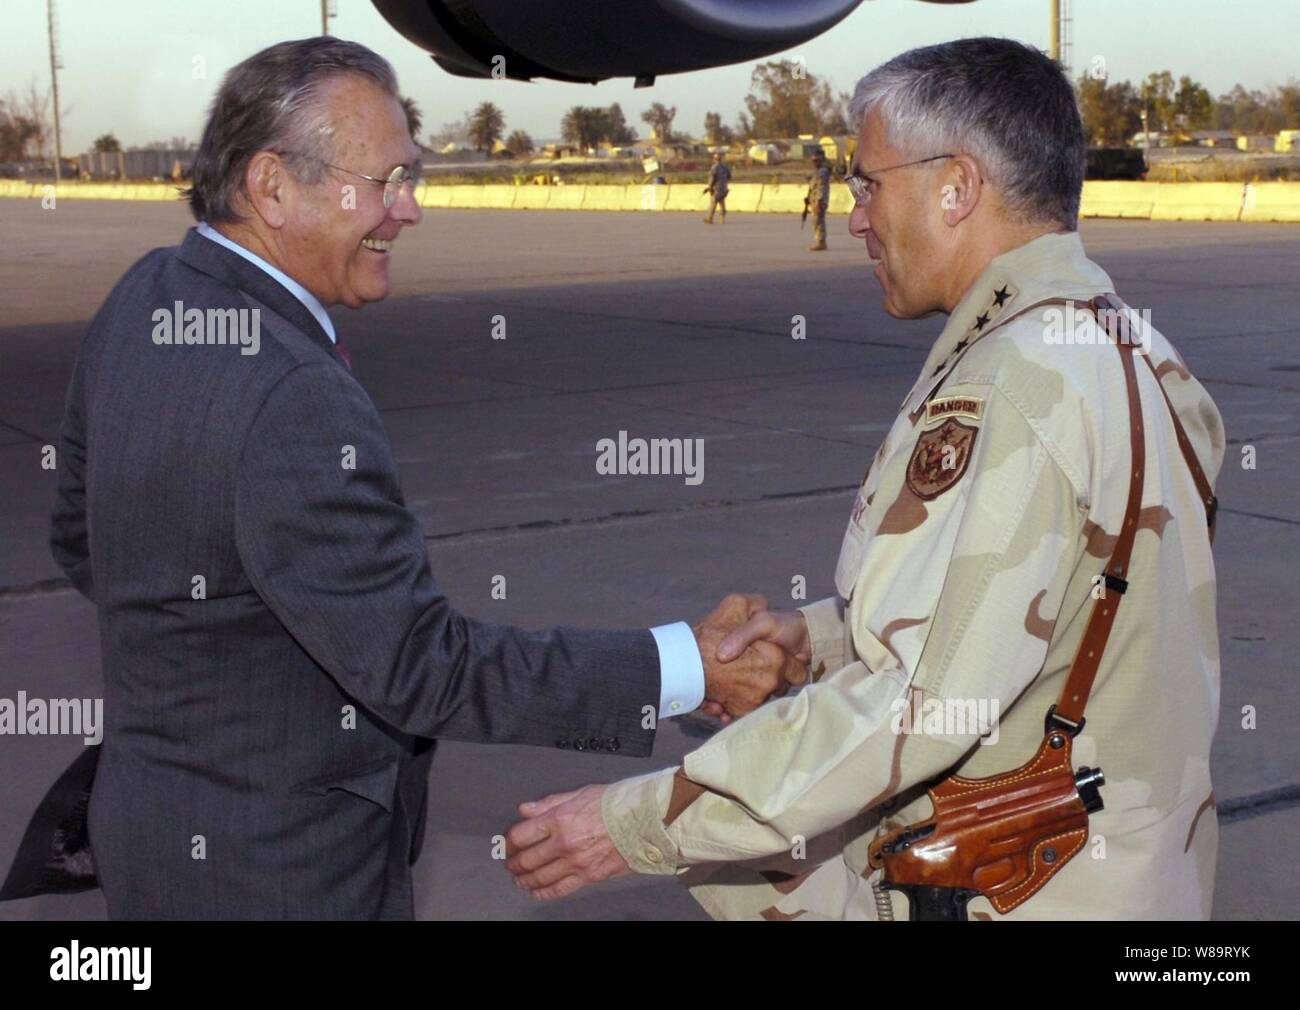 Army Gen. George Casey Jr. (right) welcomes Secretary of Defense Donald H. Rumsfeld to Baghdad, Iraq, on April 26, 2006.  Rumsfeld and Secretary of State Condoleezza Rice will meet jointly with Iraq's newly designated Prime Minister Jawad al-Maliki.  Rumsfeld will also meet with senior military leaders and troops.  Casey is the commanding general, Multi-National Force, Iraq. Stock Photo